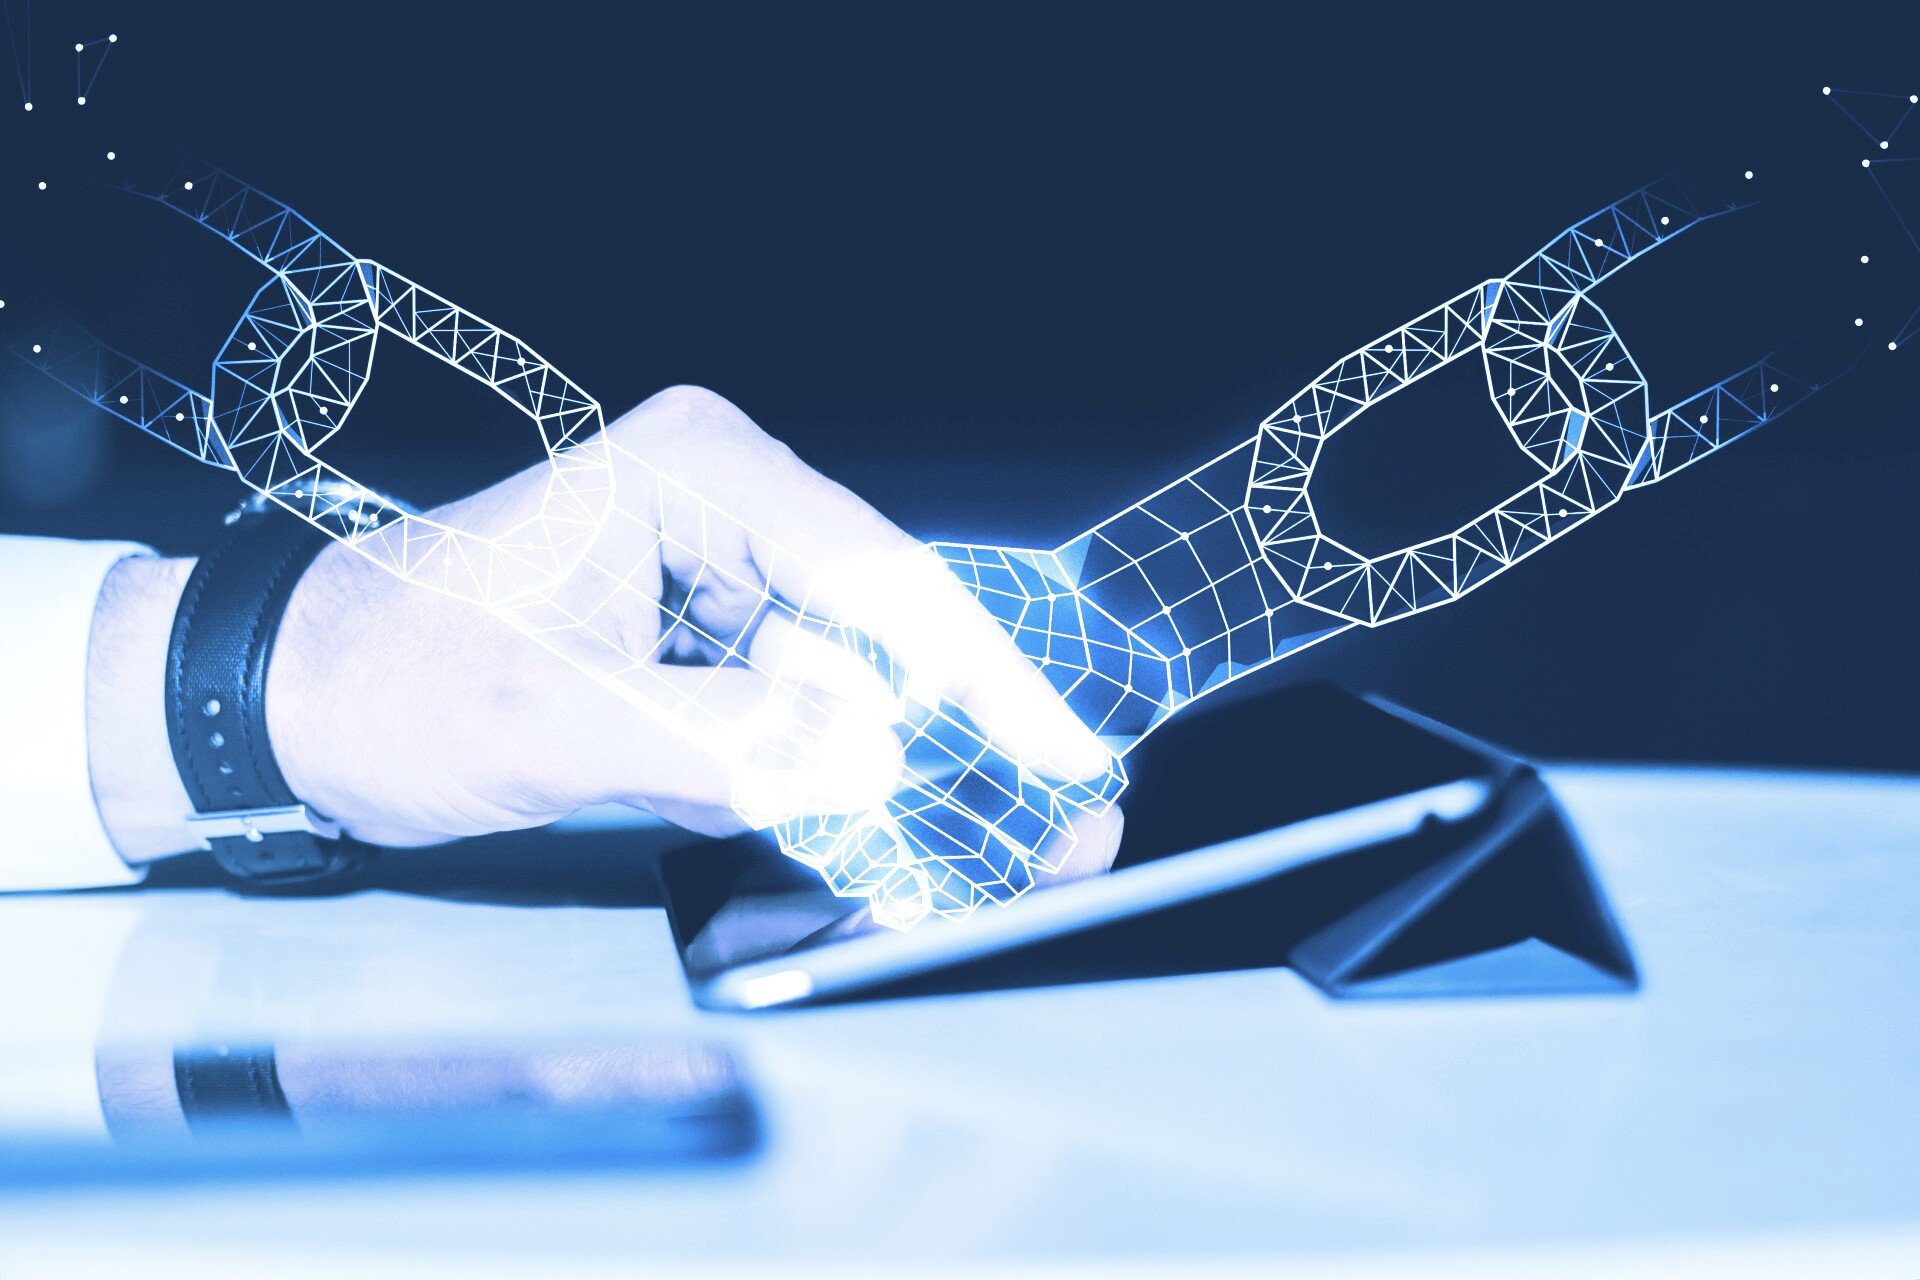 DAOs are governed by smart contracts. Image: Shutterstock.